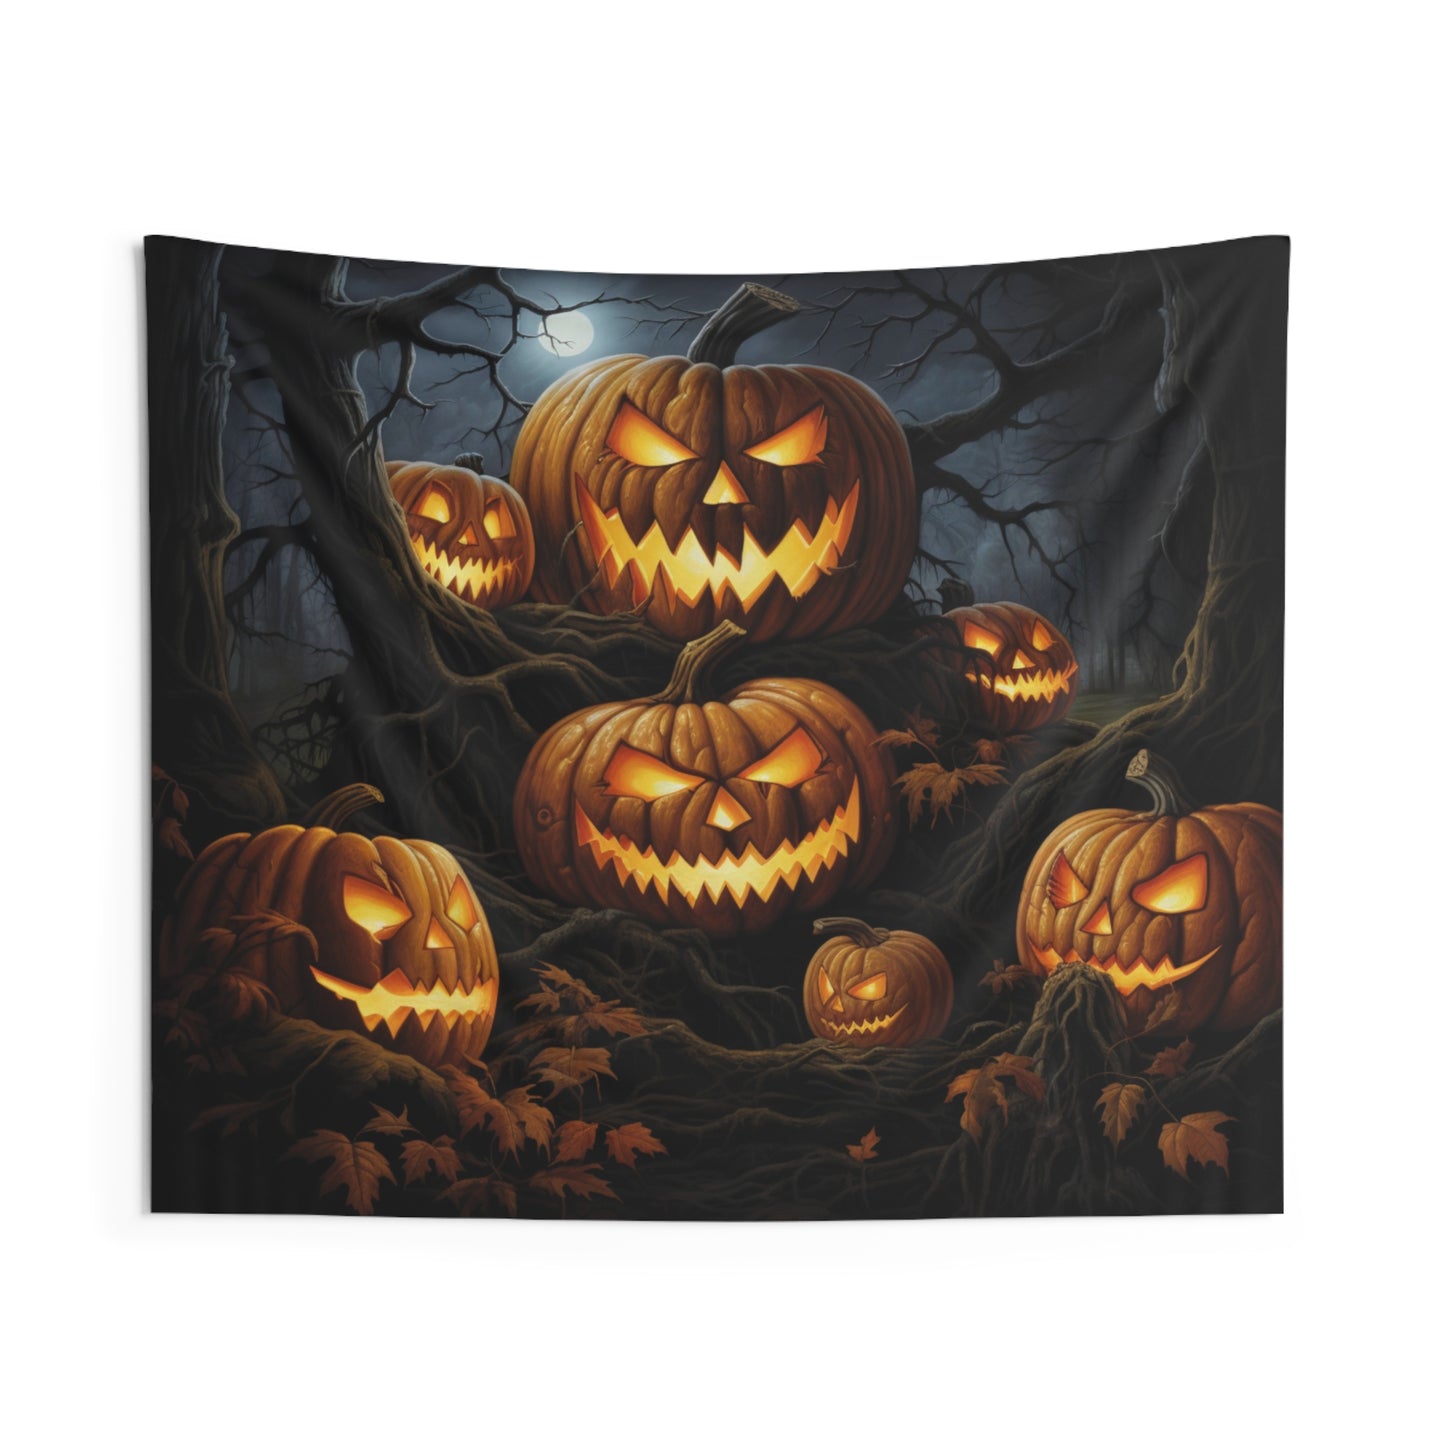 Jack-o'-lantern Pumpkins Halloween Tapestry, Spooky Scary Wall Art Hanging Cool Unique Landscape Large Small Decor Bedroom College Dorm Starcove Fashion